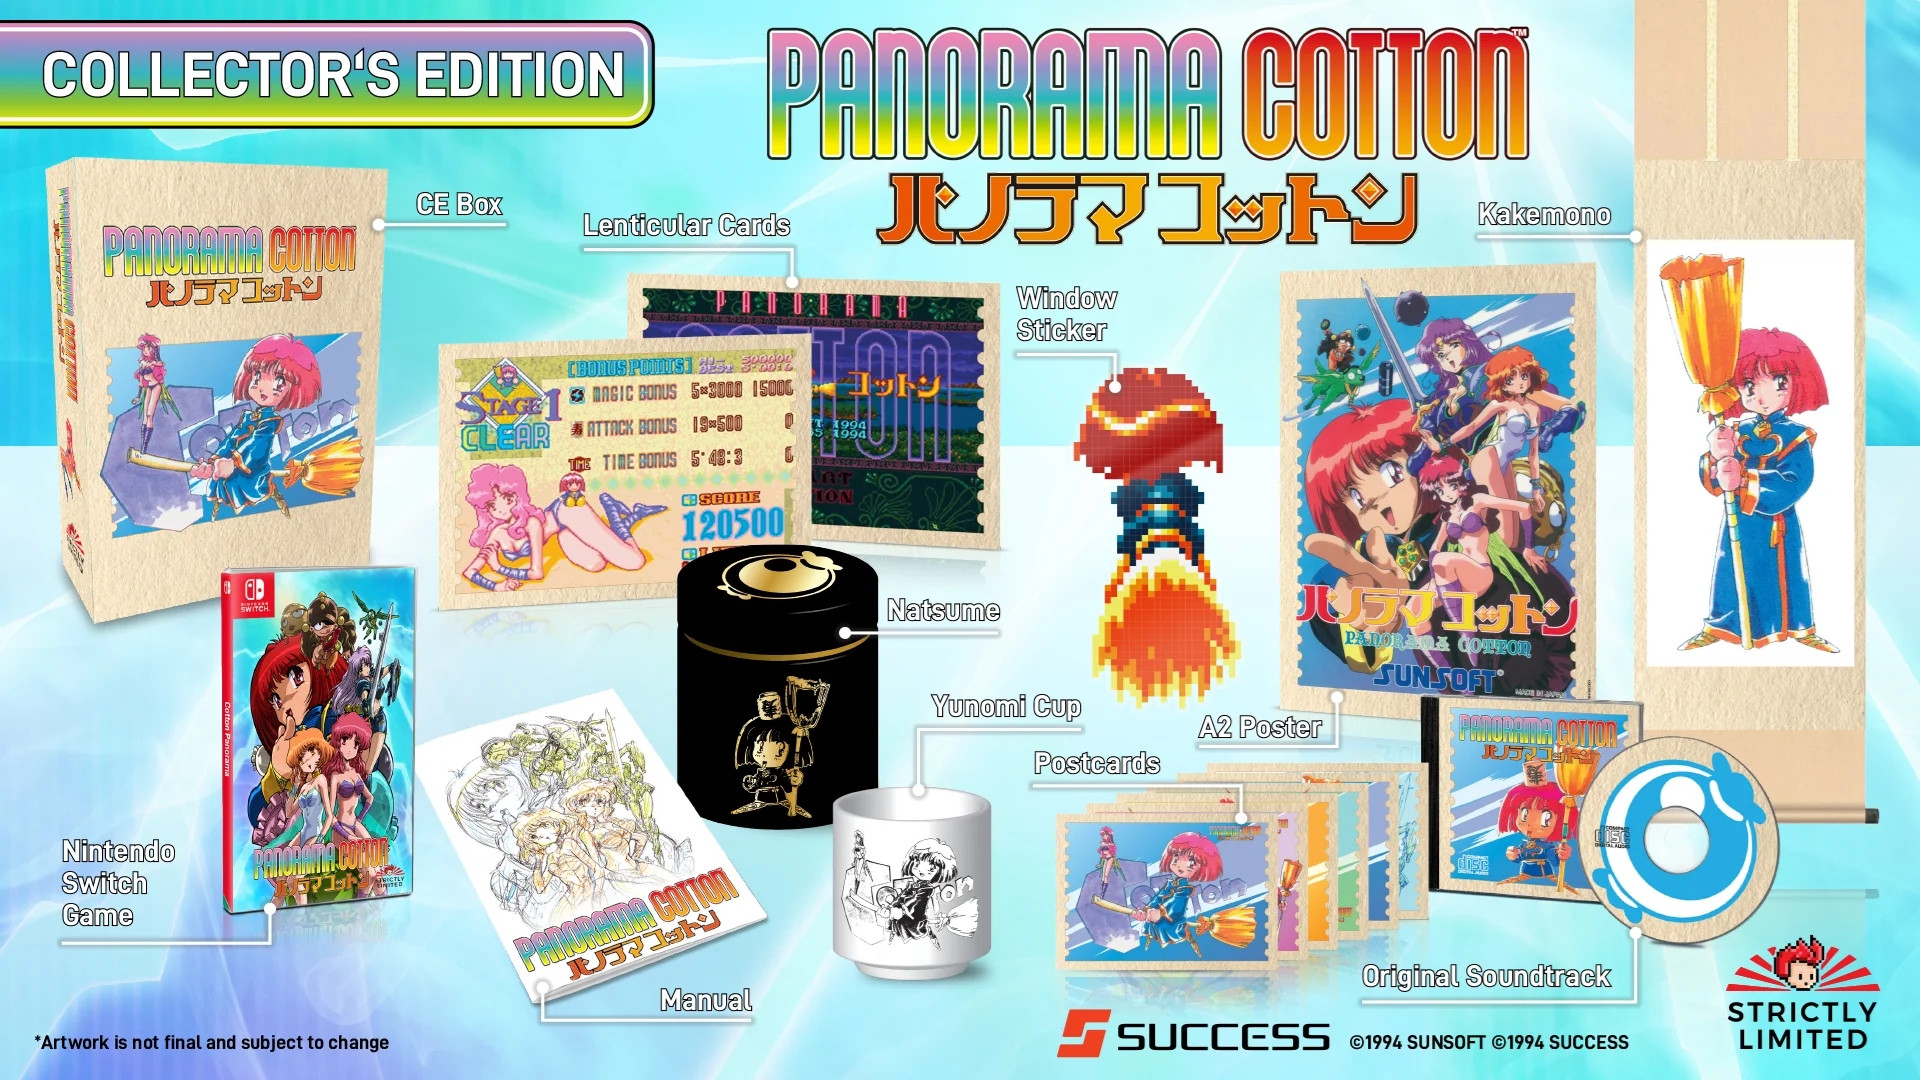 Panorama Cotton - Collector's Edition (Strictly Limited) (Switch), ININ Games, Strictly Limited Games